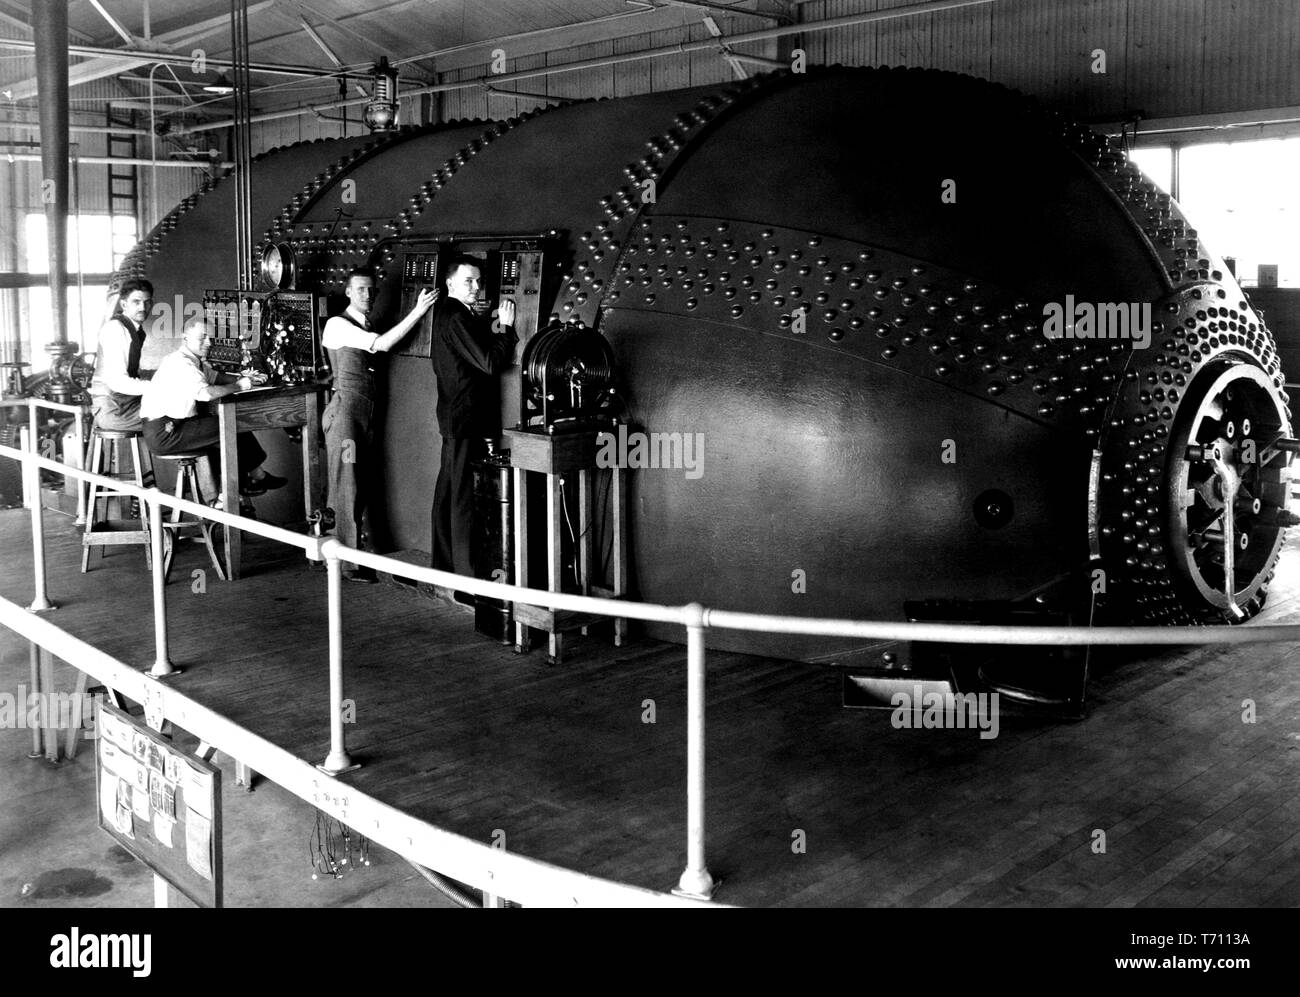 National Advisory Committee for Aeronautics (NACA) staff conducting tests on airfoils in the Variable Density Tunnel, Hampton, Virginia, including staff members Eastman Jacobs, Shorty Defoe, Malvern Powell, and Harold Turner, March 15, 1929. Image courtesy National Aeronautics and Space Administration (NASA). () Stock Photo